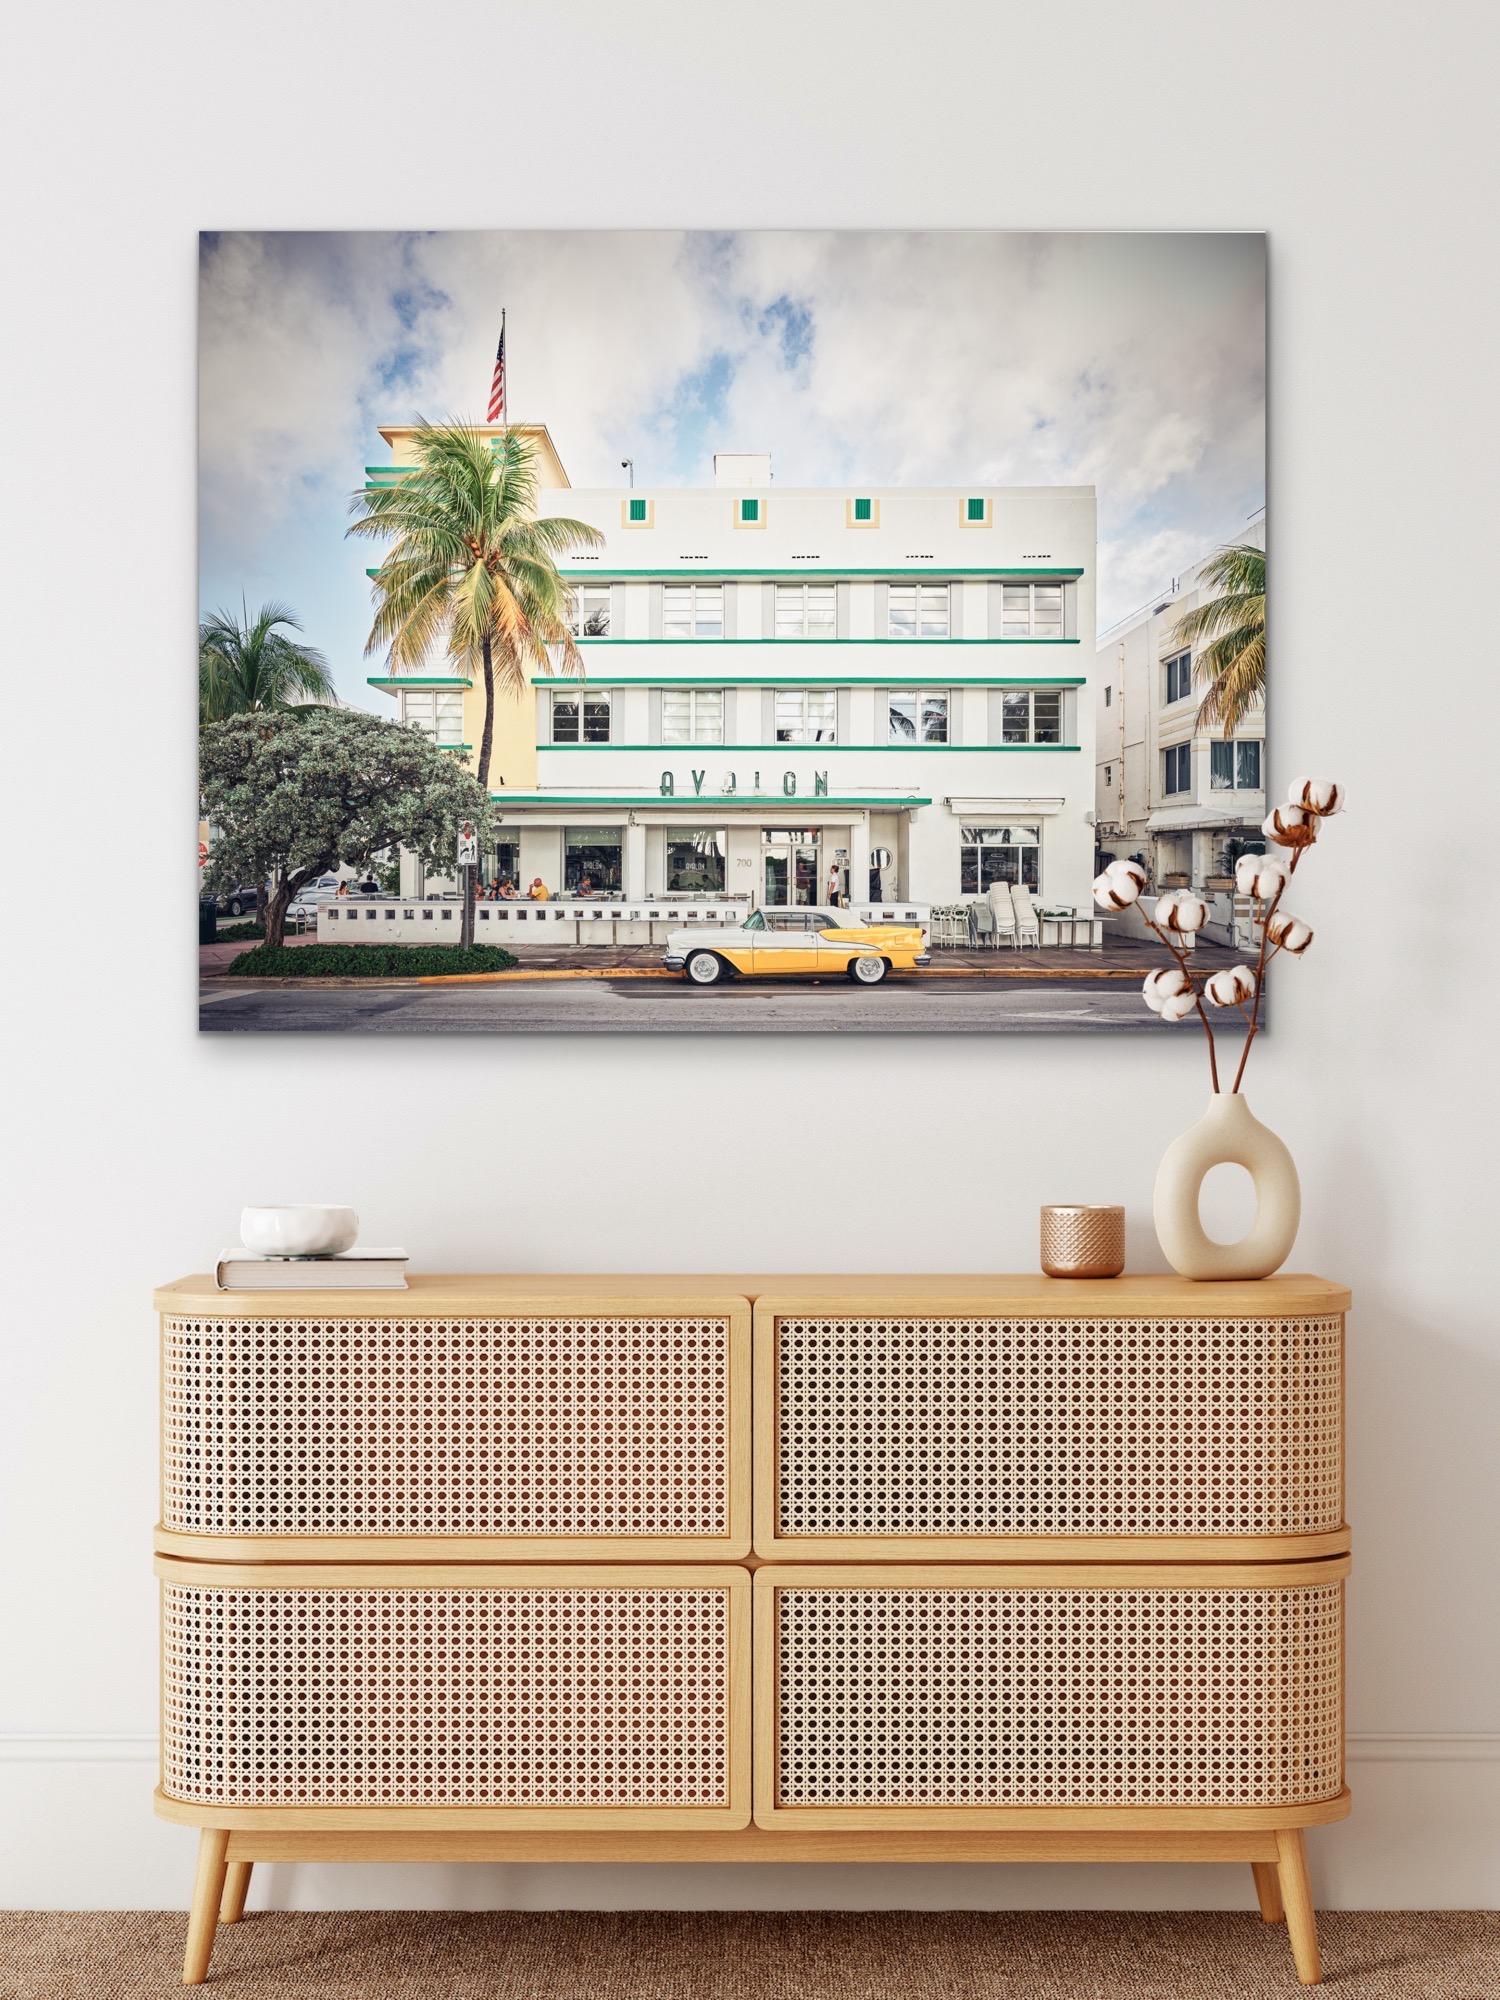 This contemporary urban photograph by Peter Mendelson captures the Deco style Avalon building in Miami Beach, Florida, with a yellow vintage car parked on the street next to a palm tree in front of the building. 

This is a metal sublimation print.